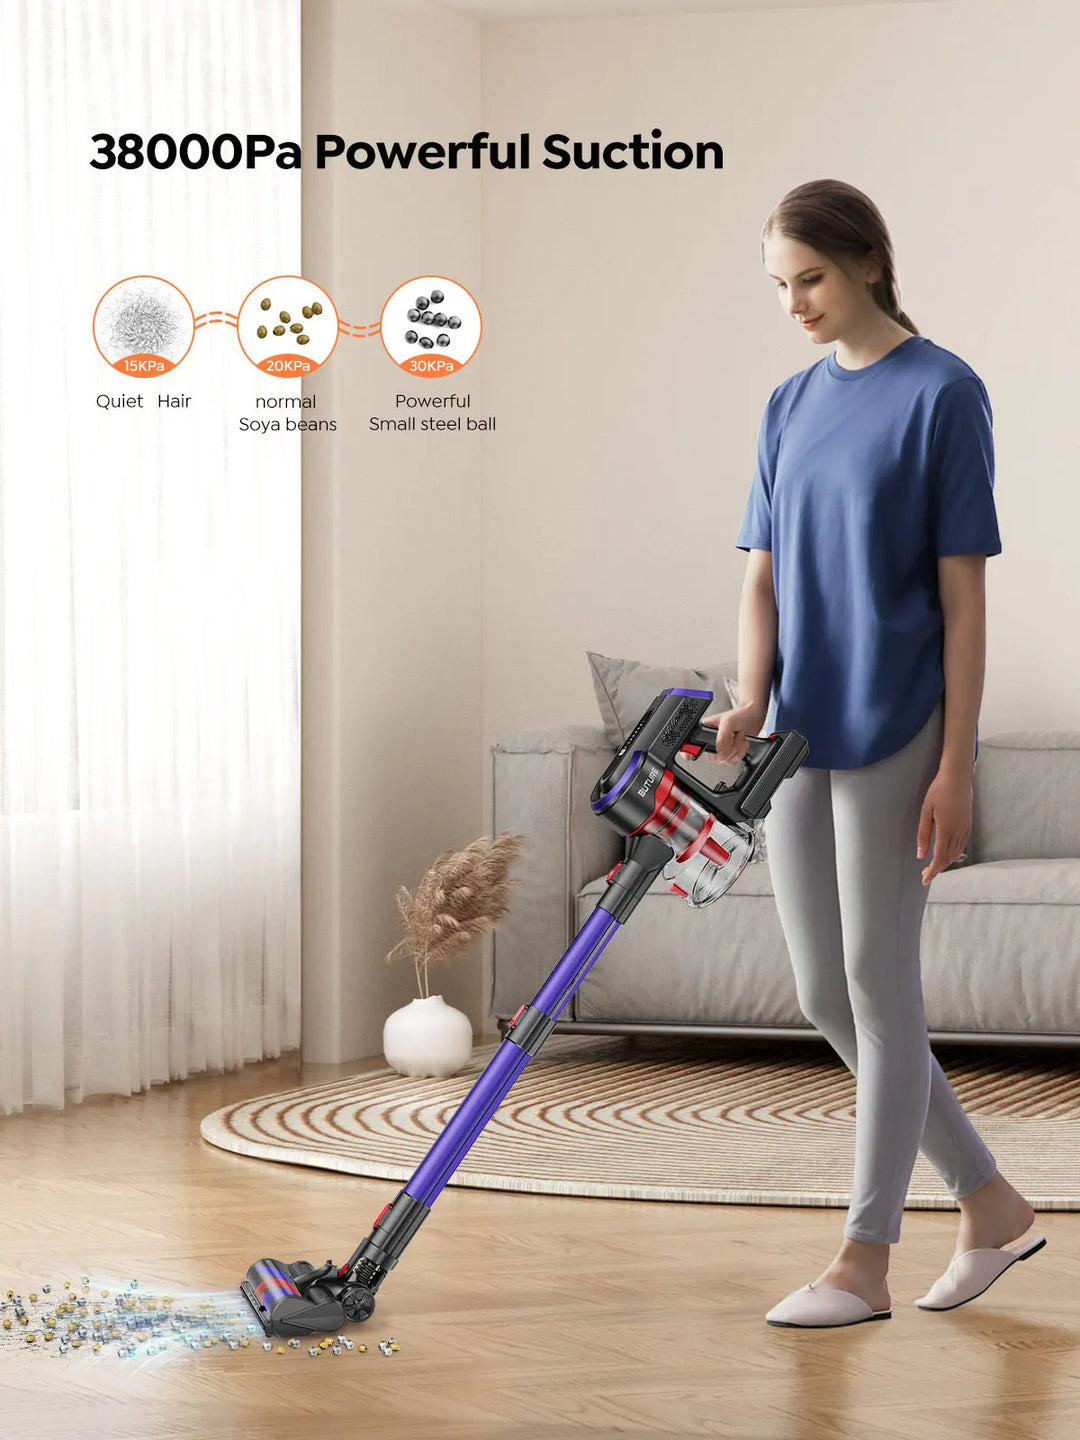 Buture 450 W 38 kPa cordless hand and stick vacuum cleaner